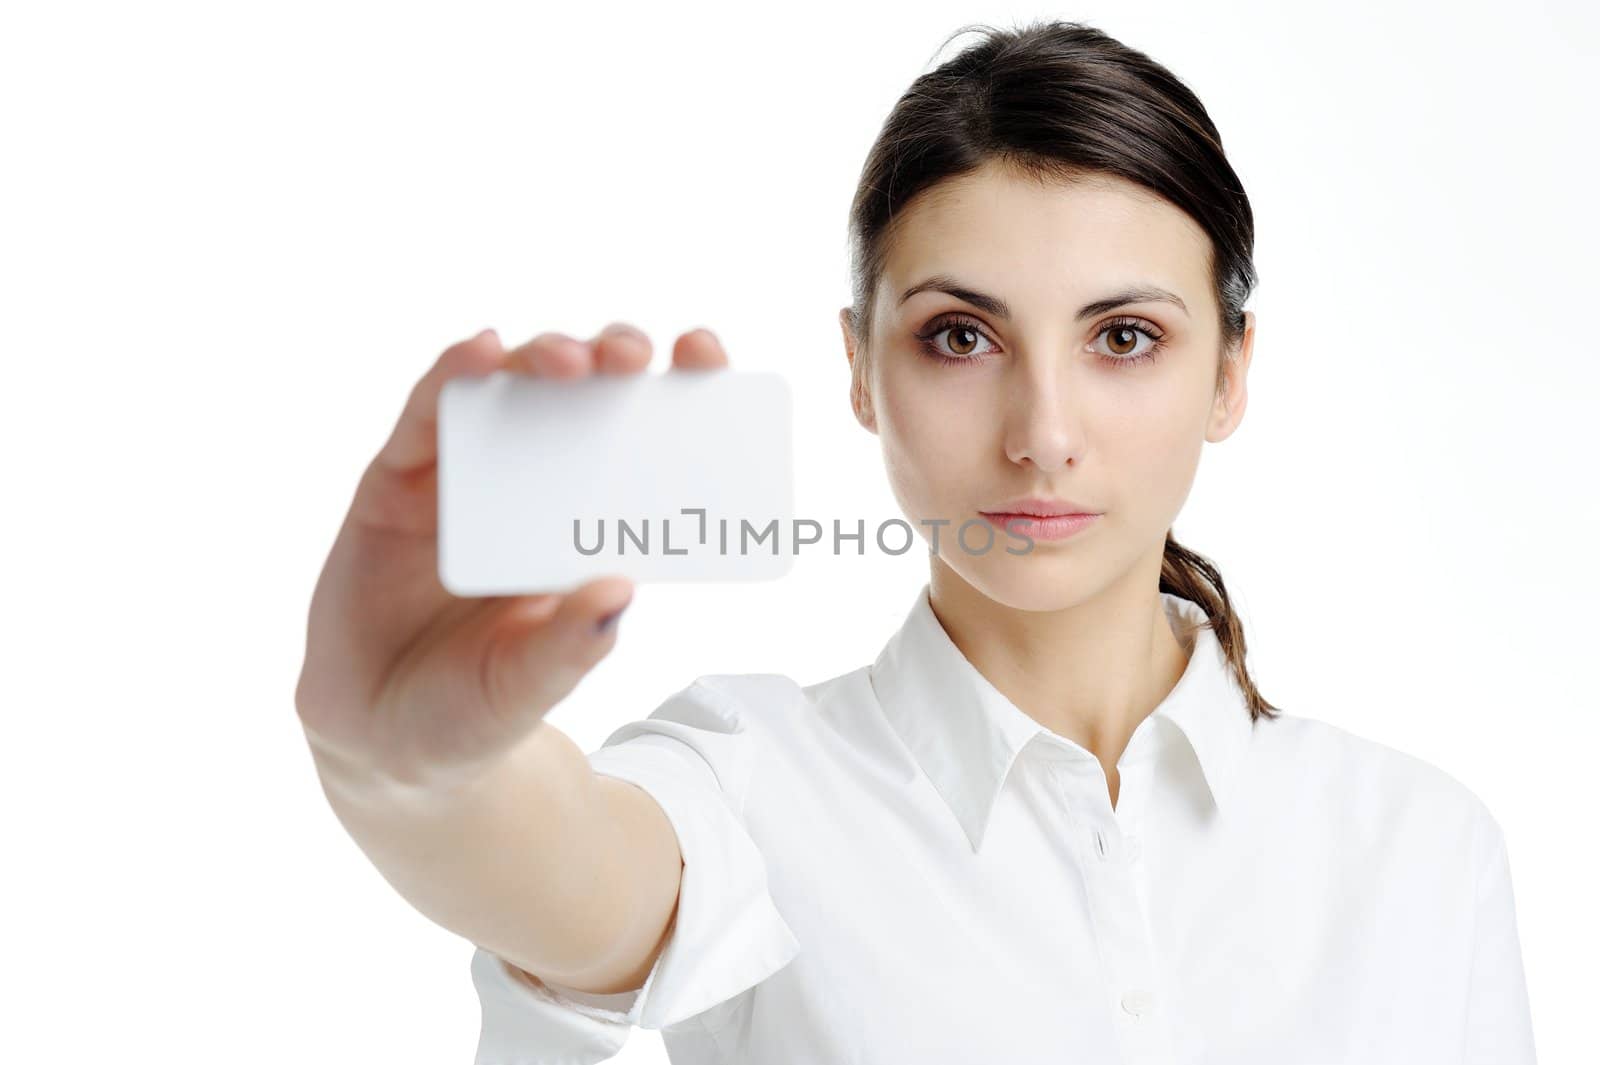 An image of young woman holding blank businesscard in hand